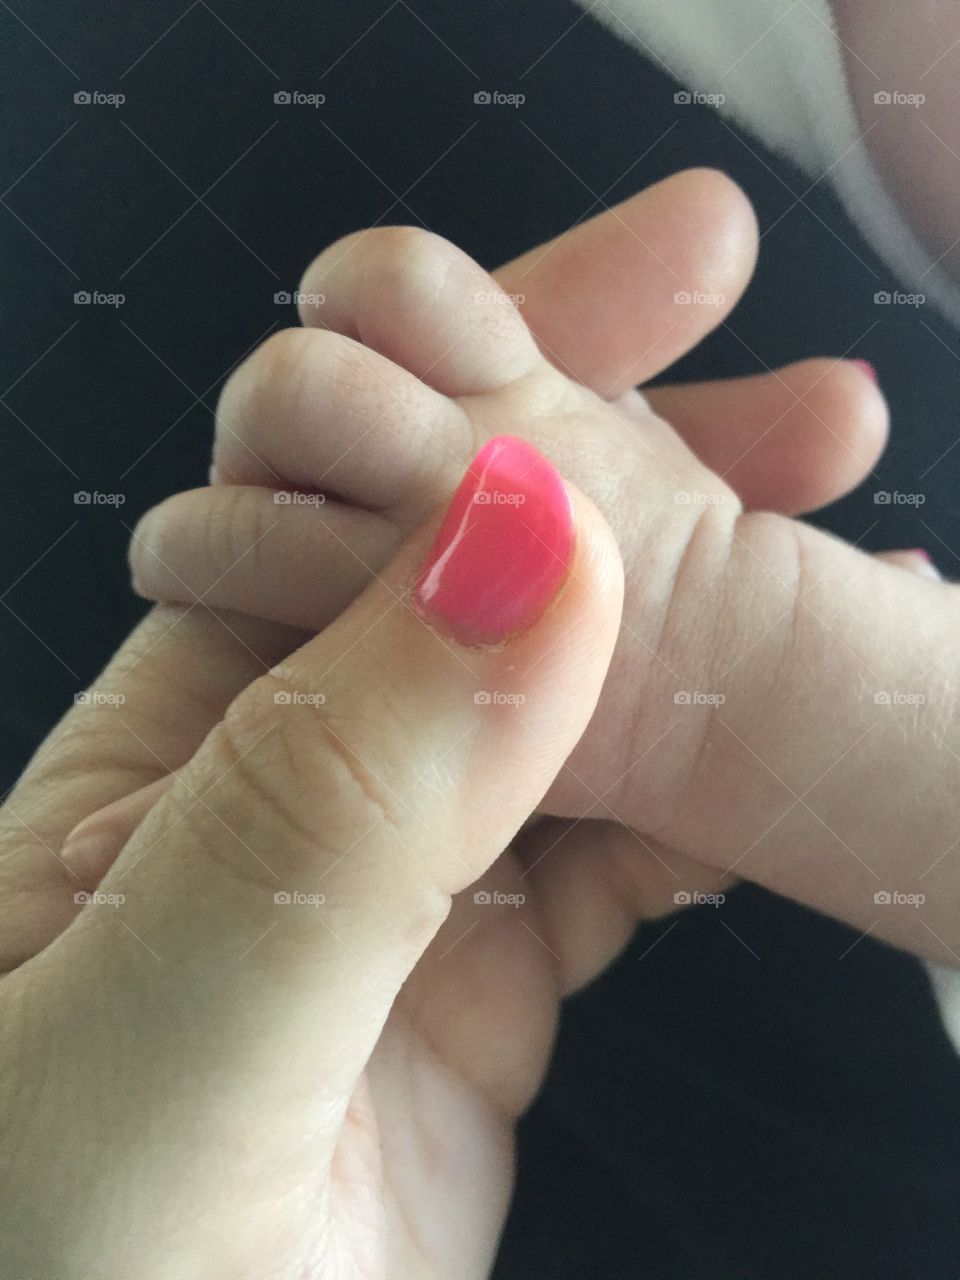 Baby holding hands with woman 
Baby Hand 
Woman Hand 
Pink Nails 
Precious 